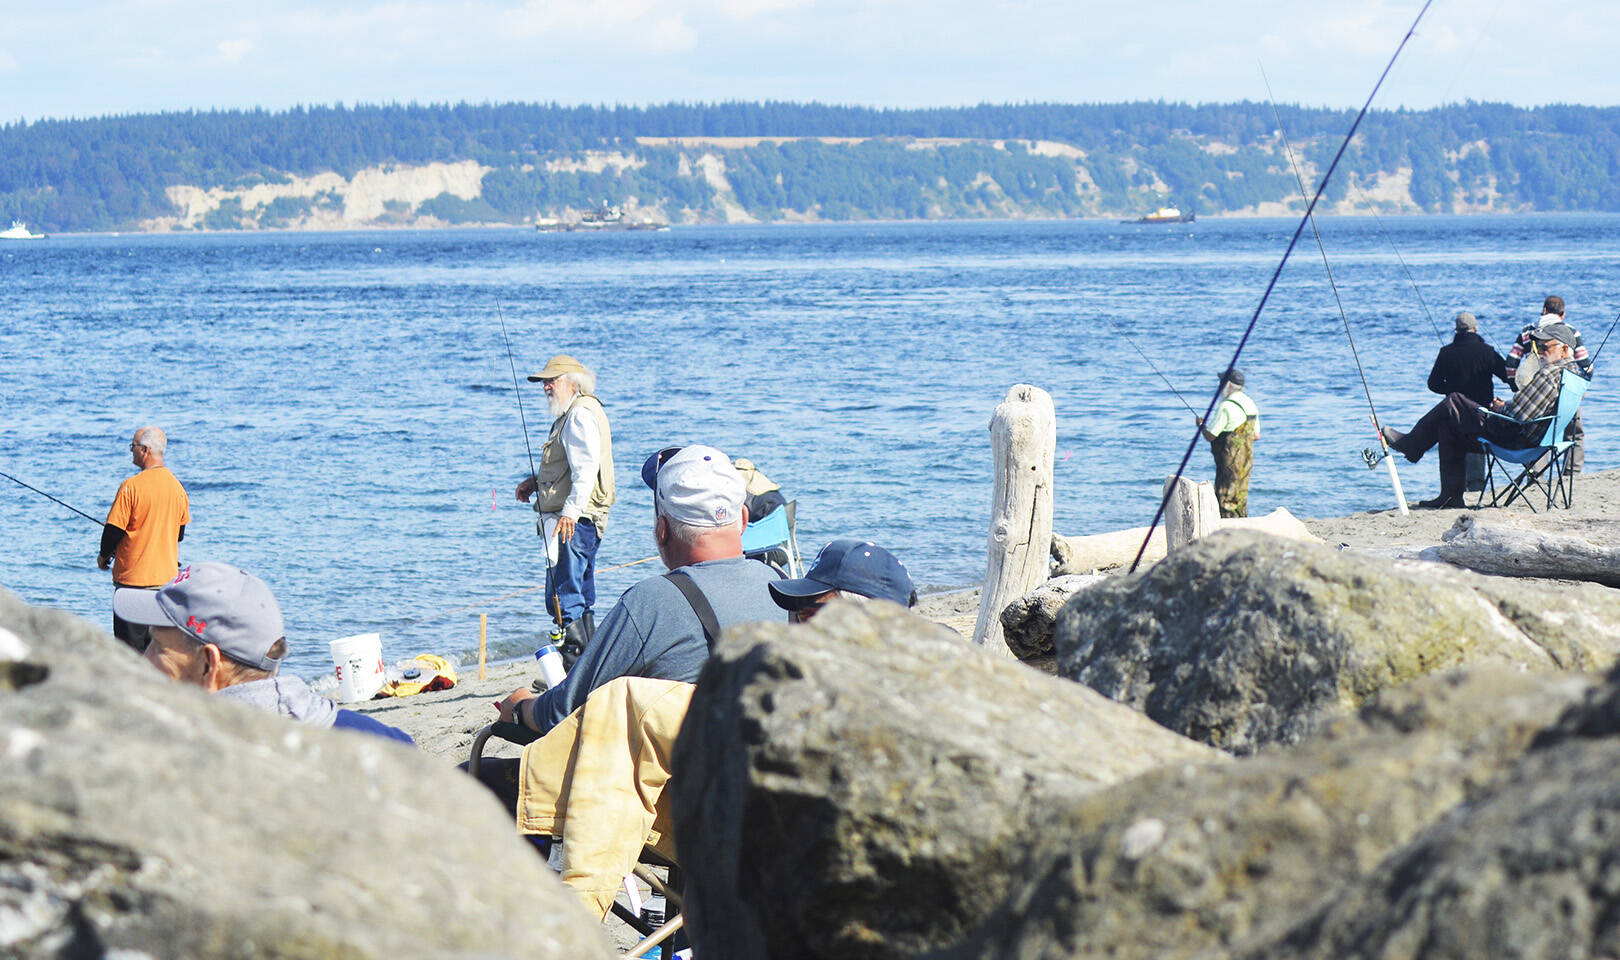 Fall salmon runs bring lots of fishermen to the beaches near the Point No Point lighthouse. Steve Powell/North Kitsap Herald Photos